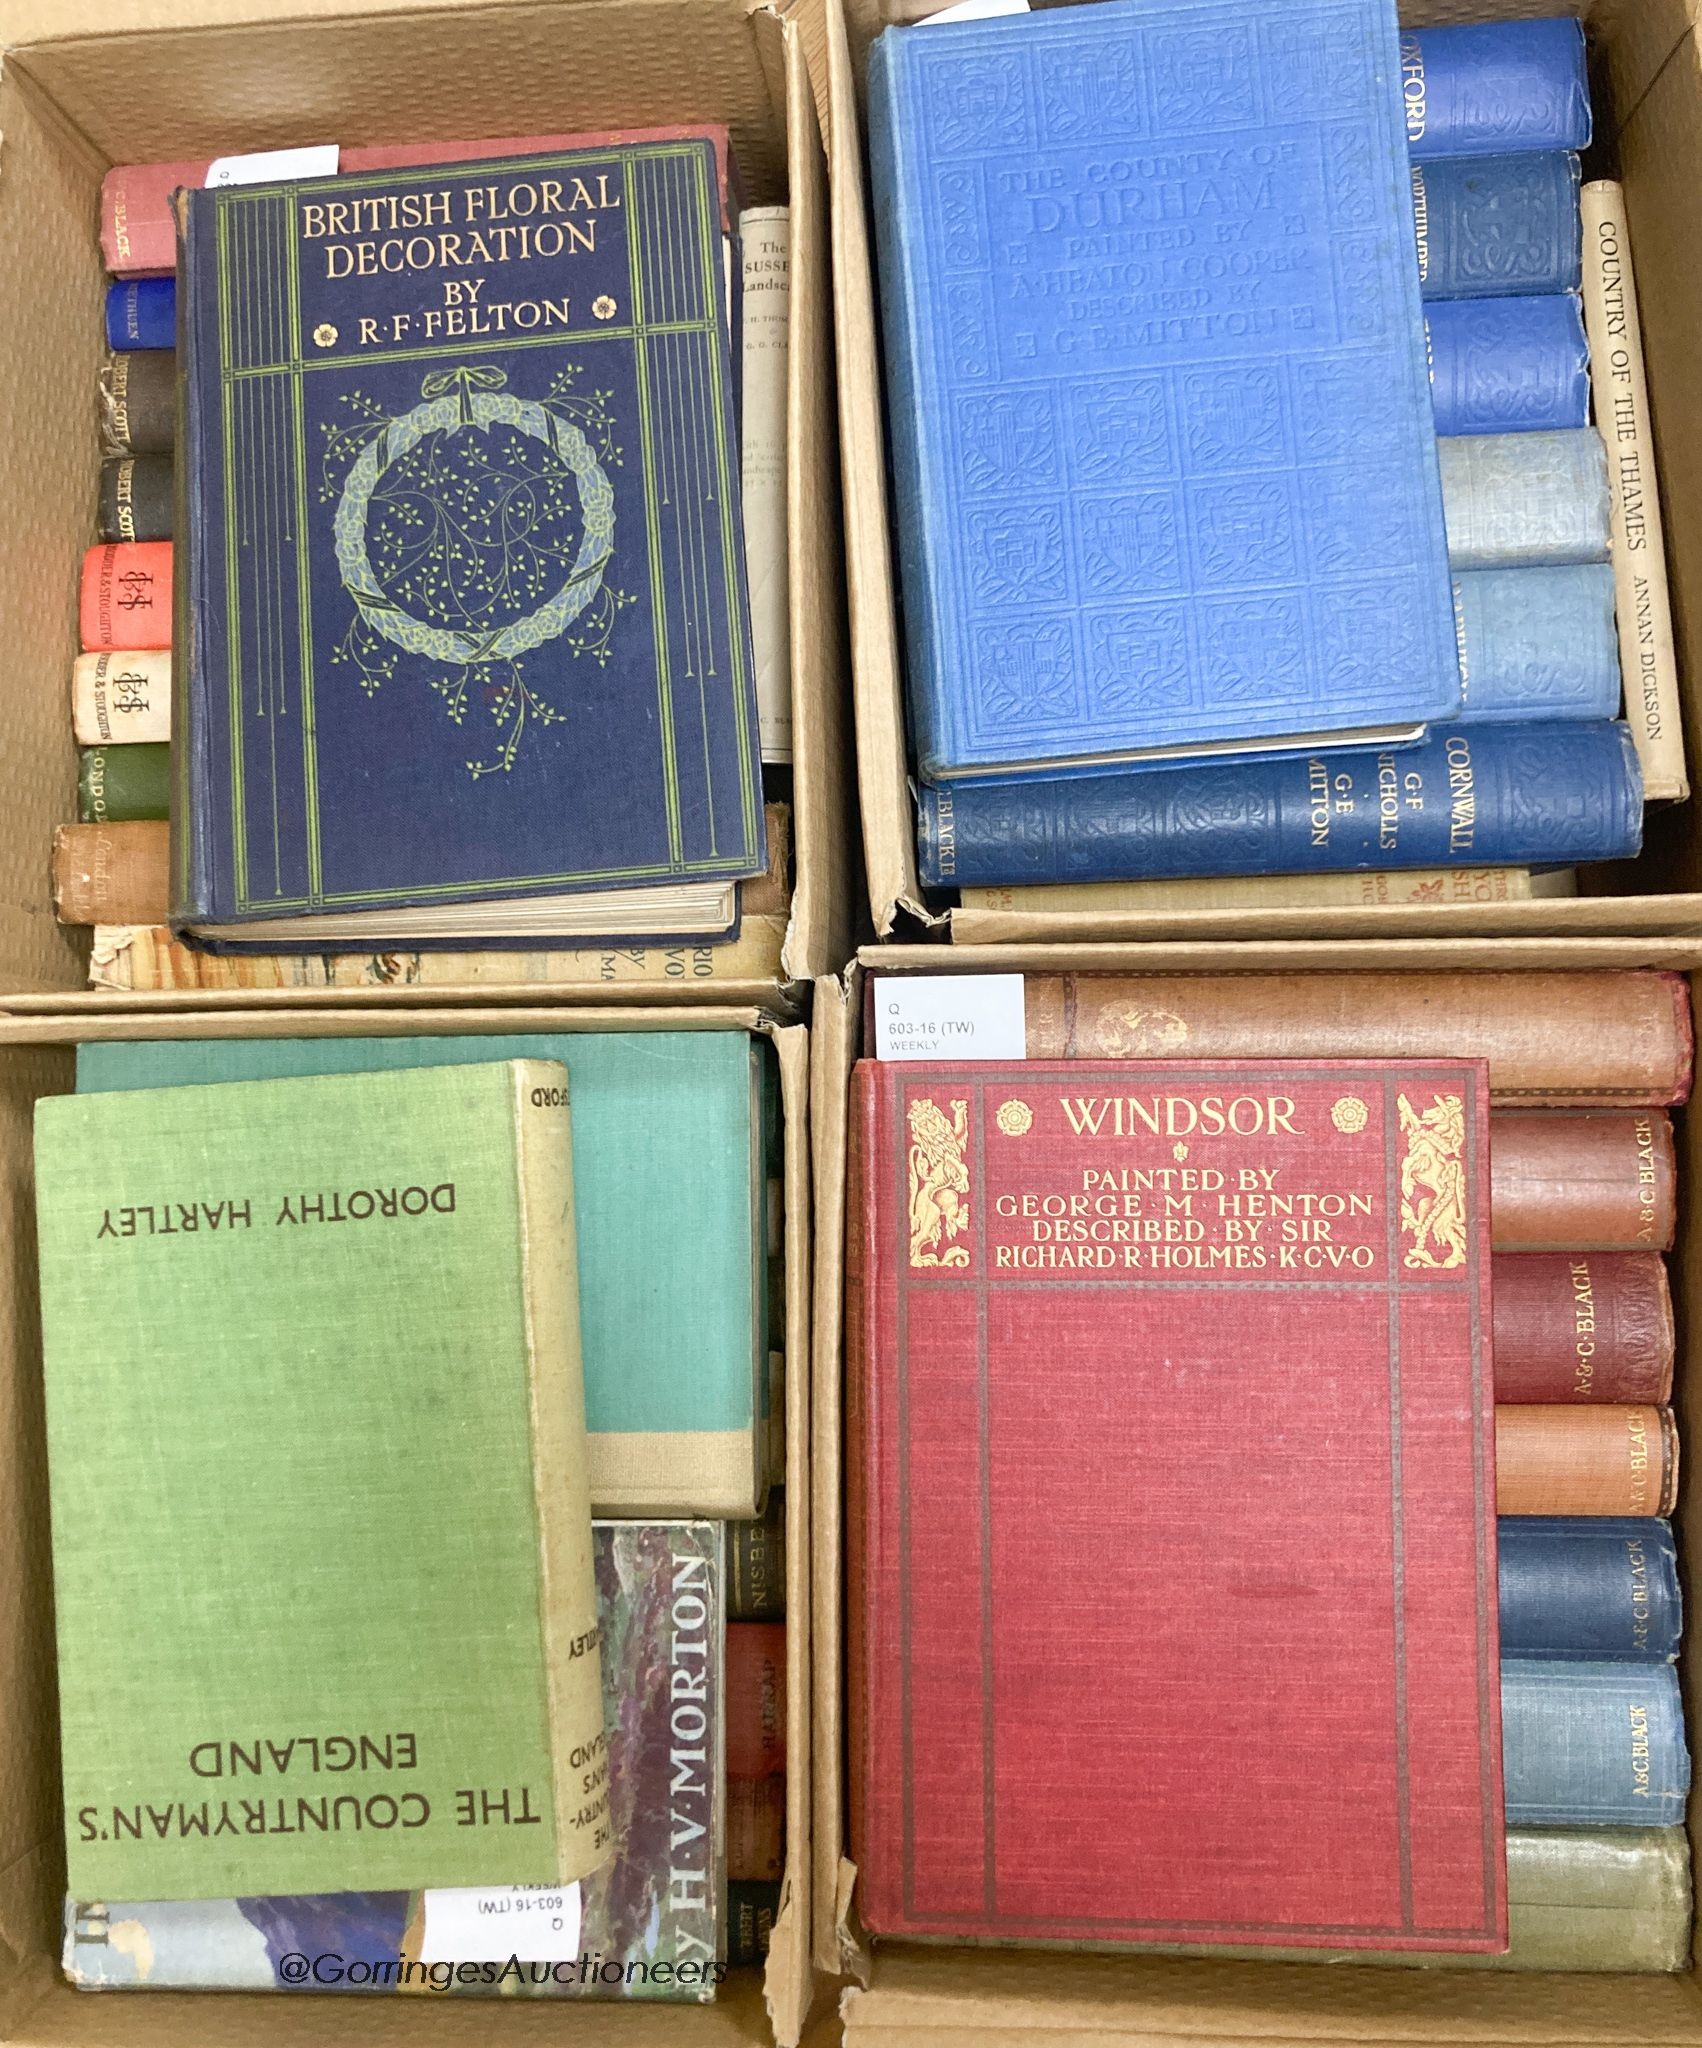 A large collection of cloth-bound and other topographical books on British counties and cities, mainly published by A. & C. Black